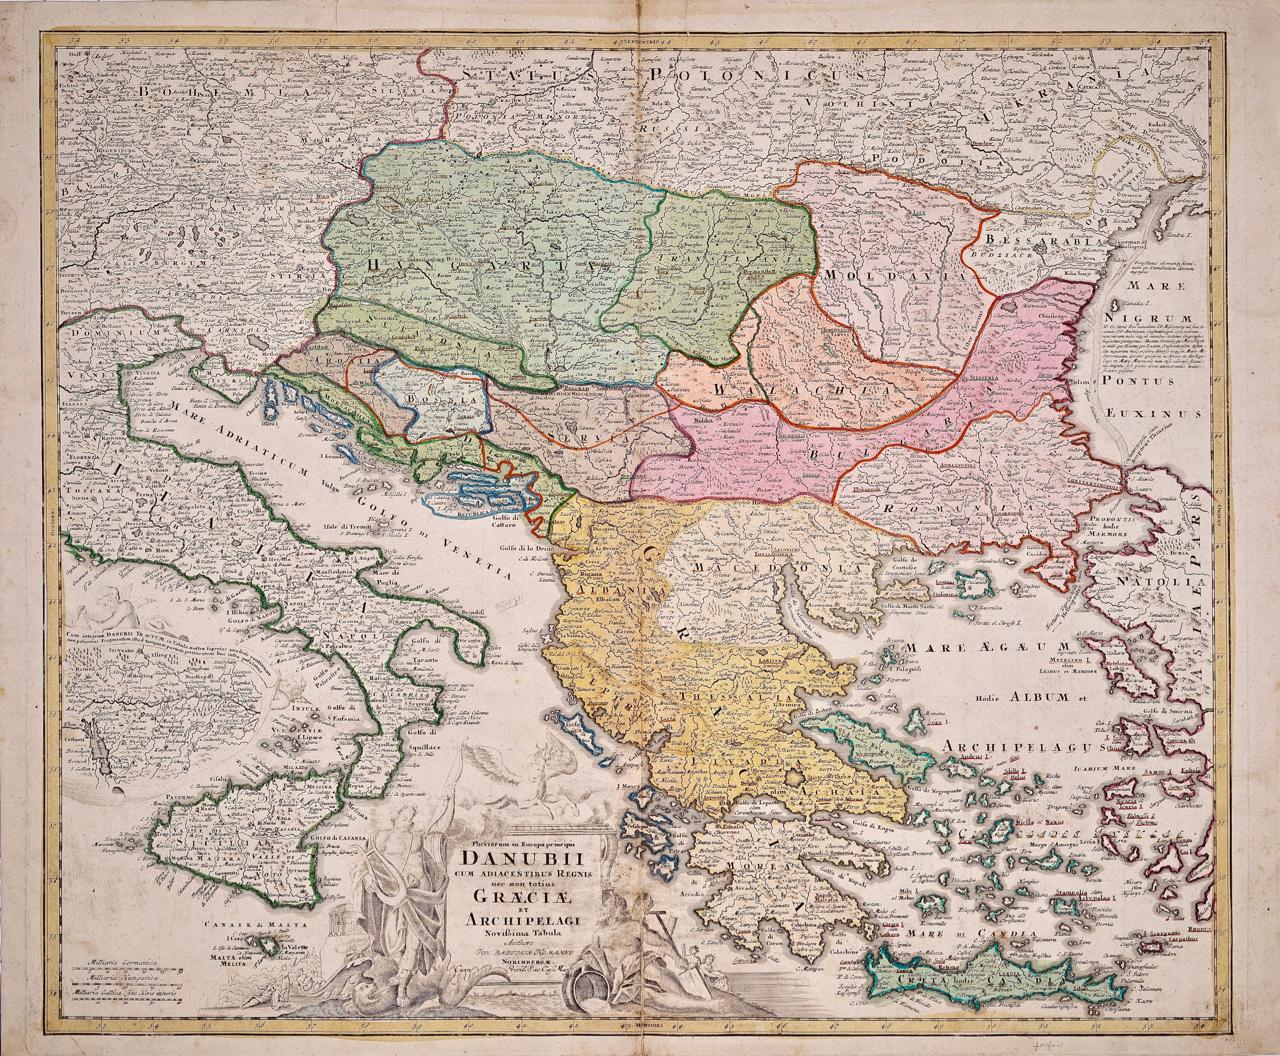 Danube River, Italy, Greece and Croatia: A Hand-colored 18th C. Homann Map 